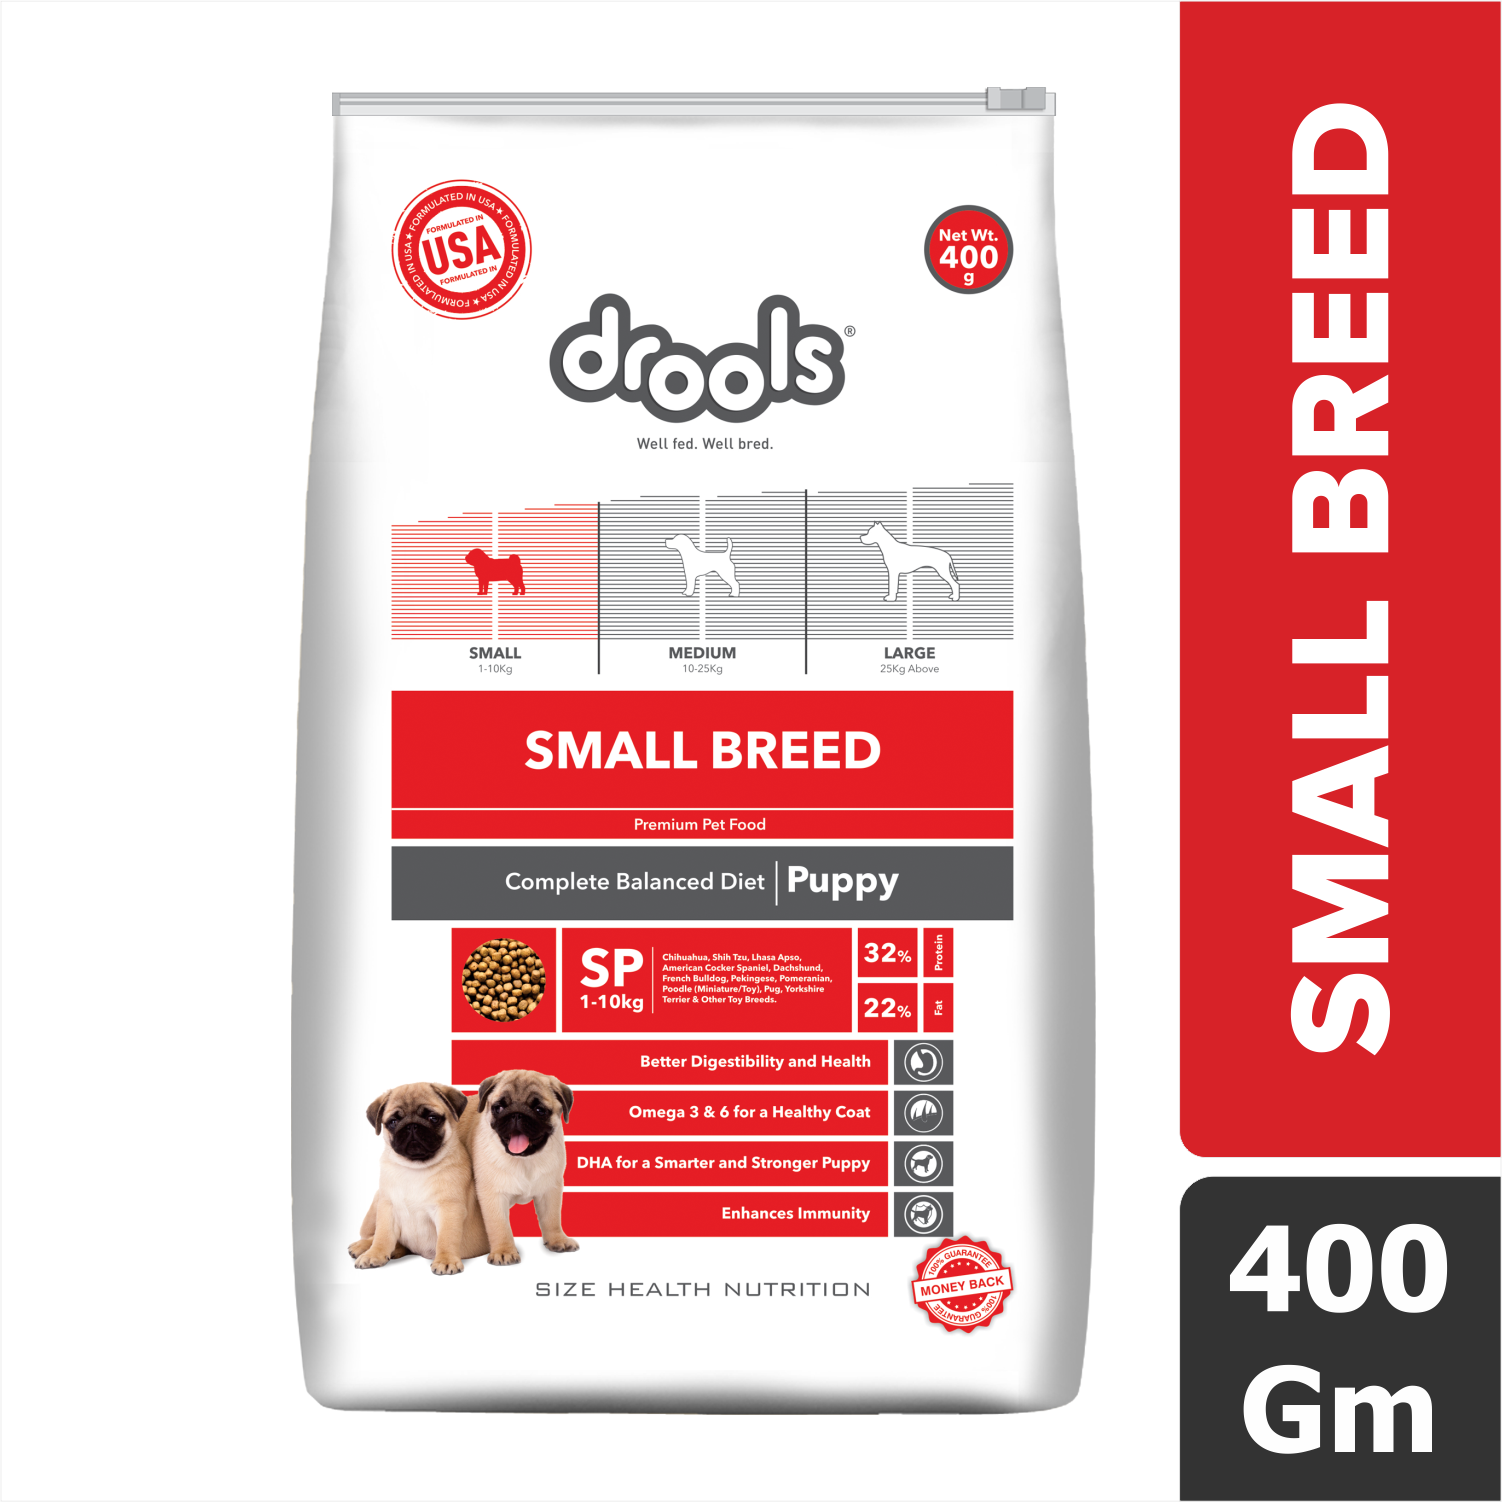 Drools Premium Small Breed Puppy Dog Dry Food